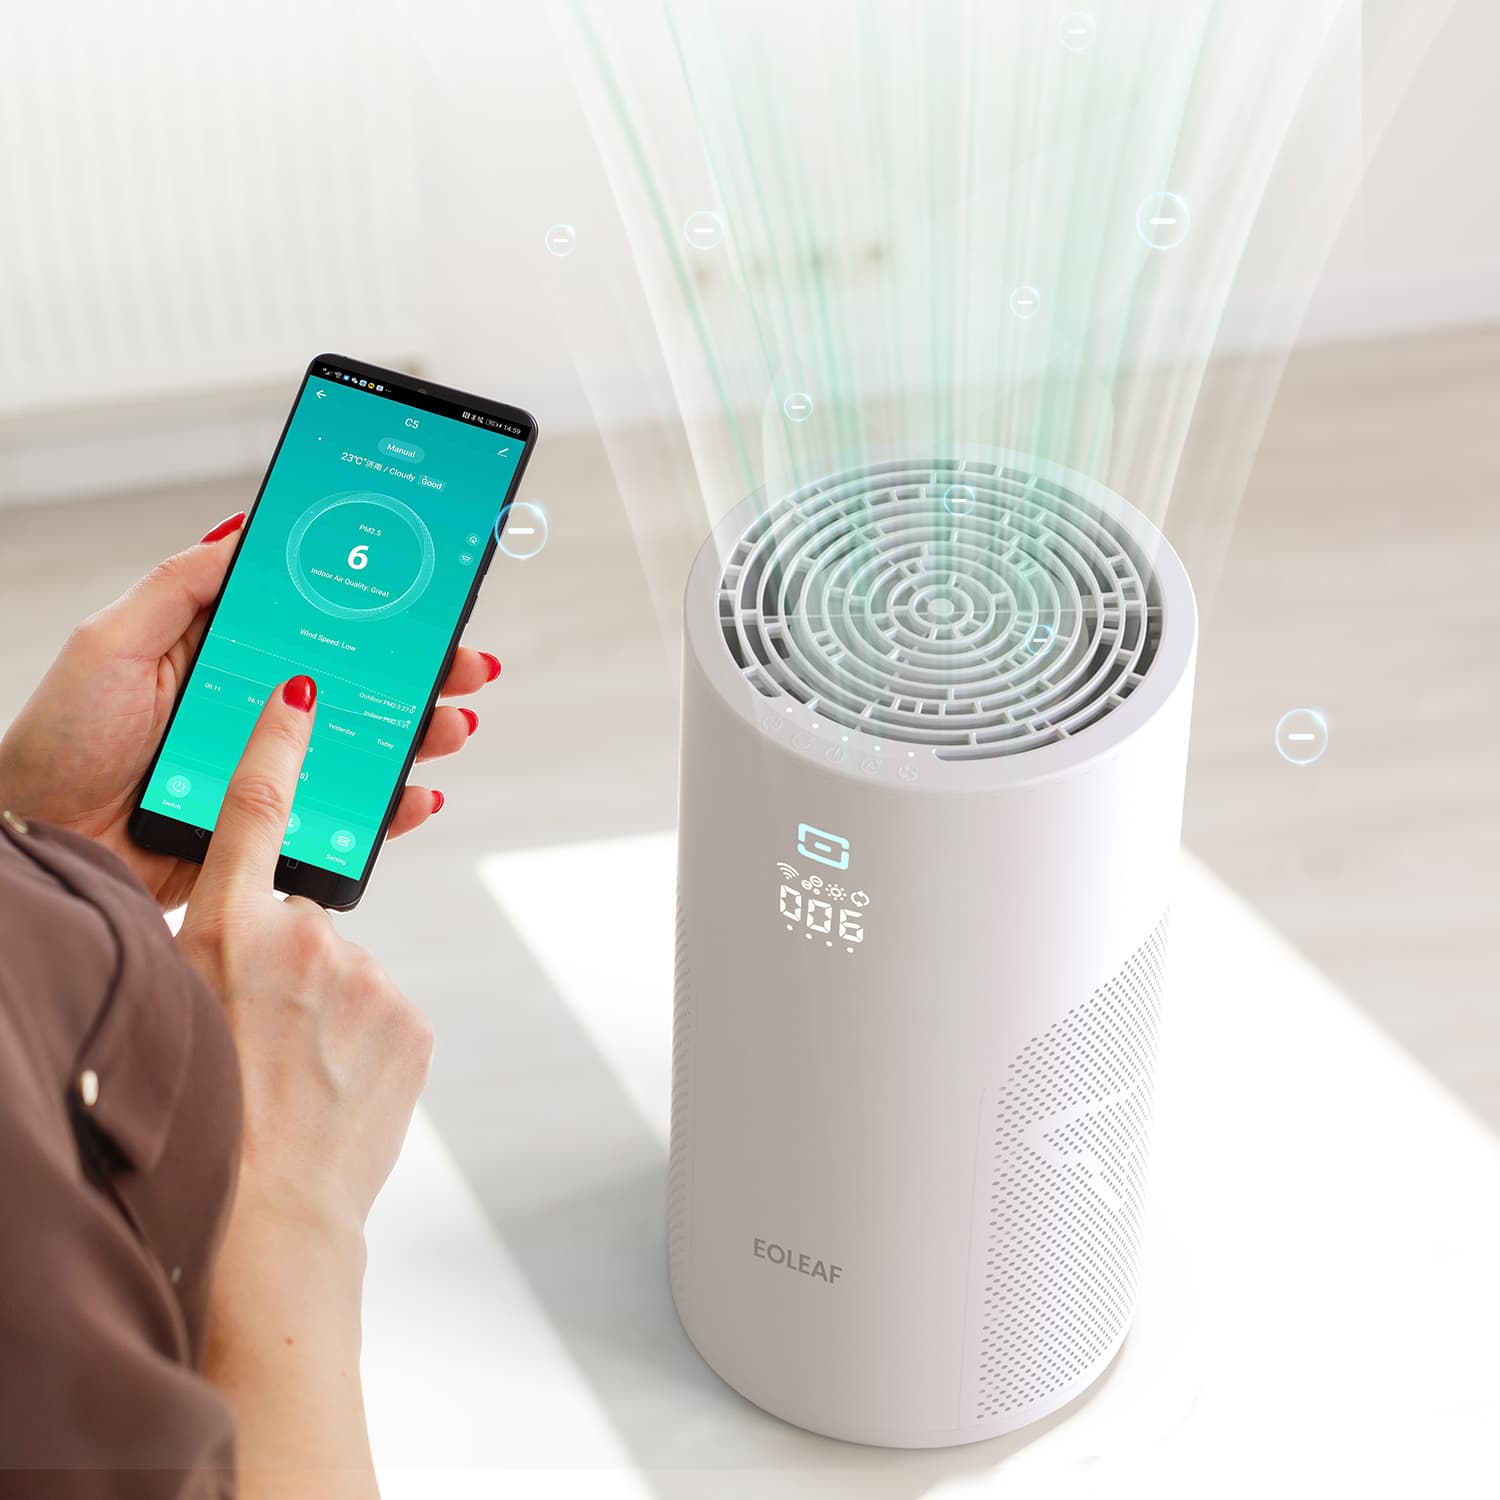 Eoleaf's AEROPRO 40 air purifier offers real-time air quality data 